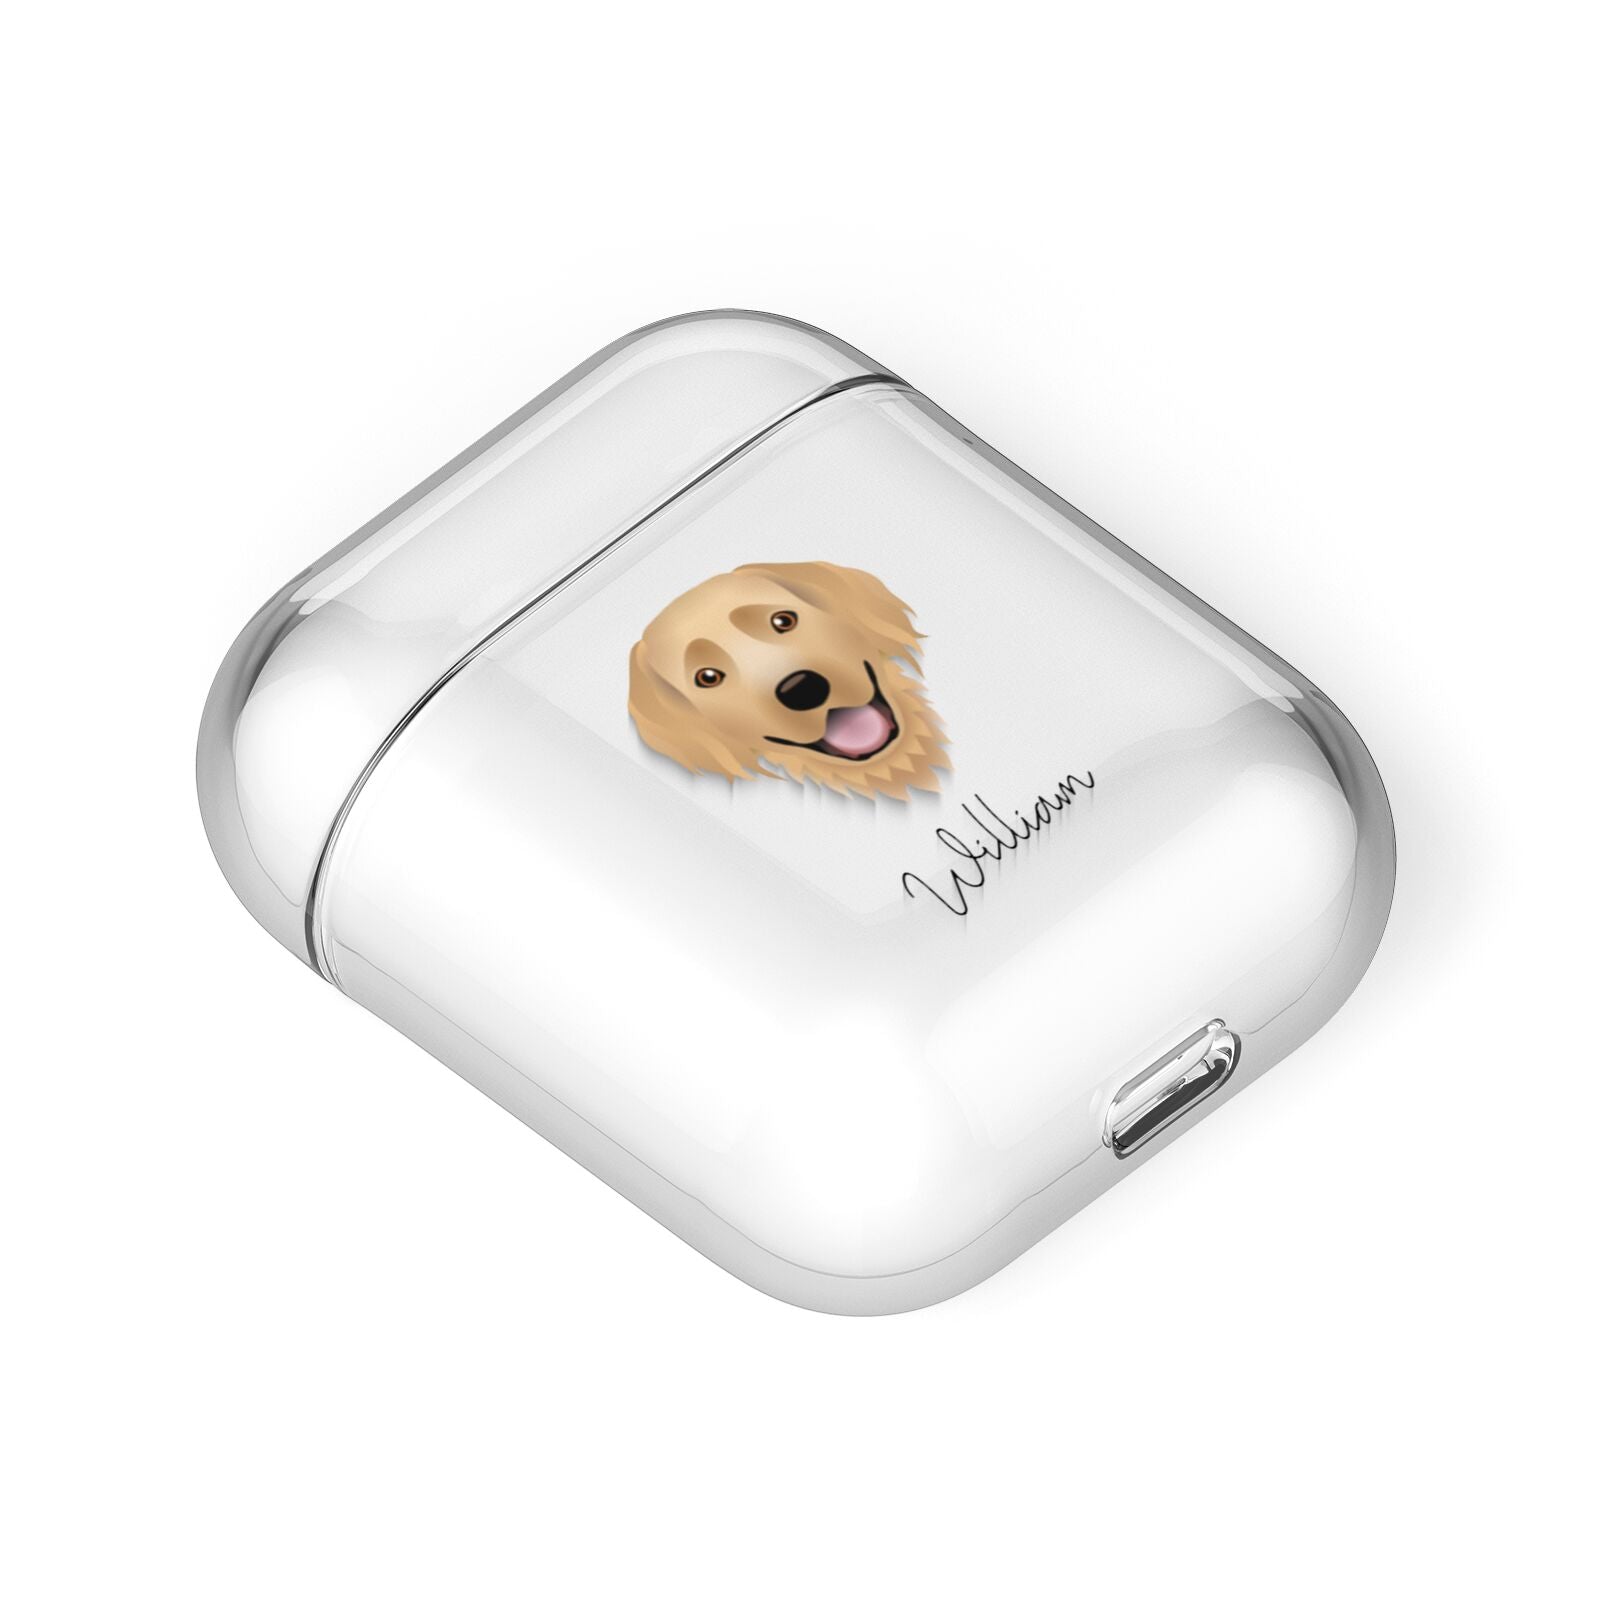 Hovawart Personalised AirPods Case Laid Flat